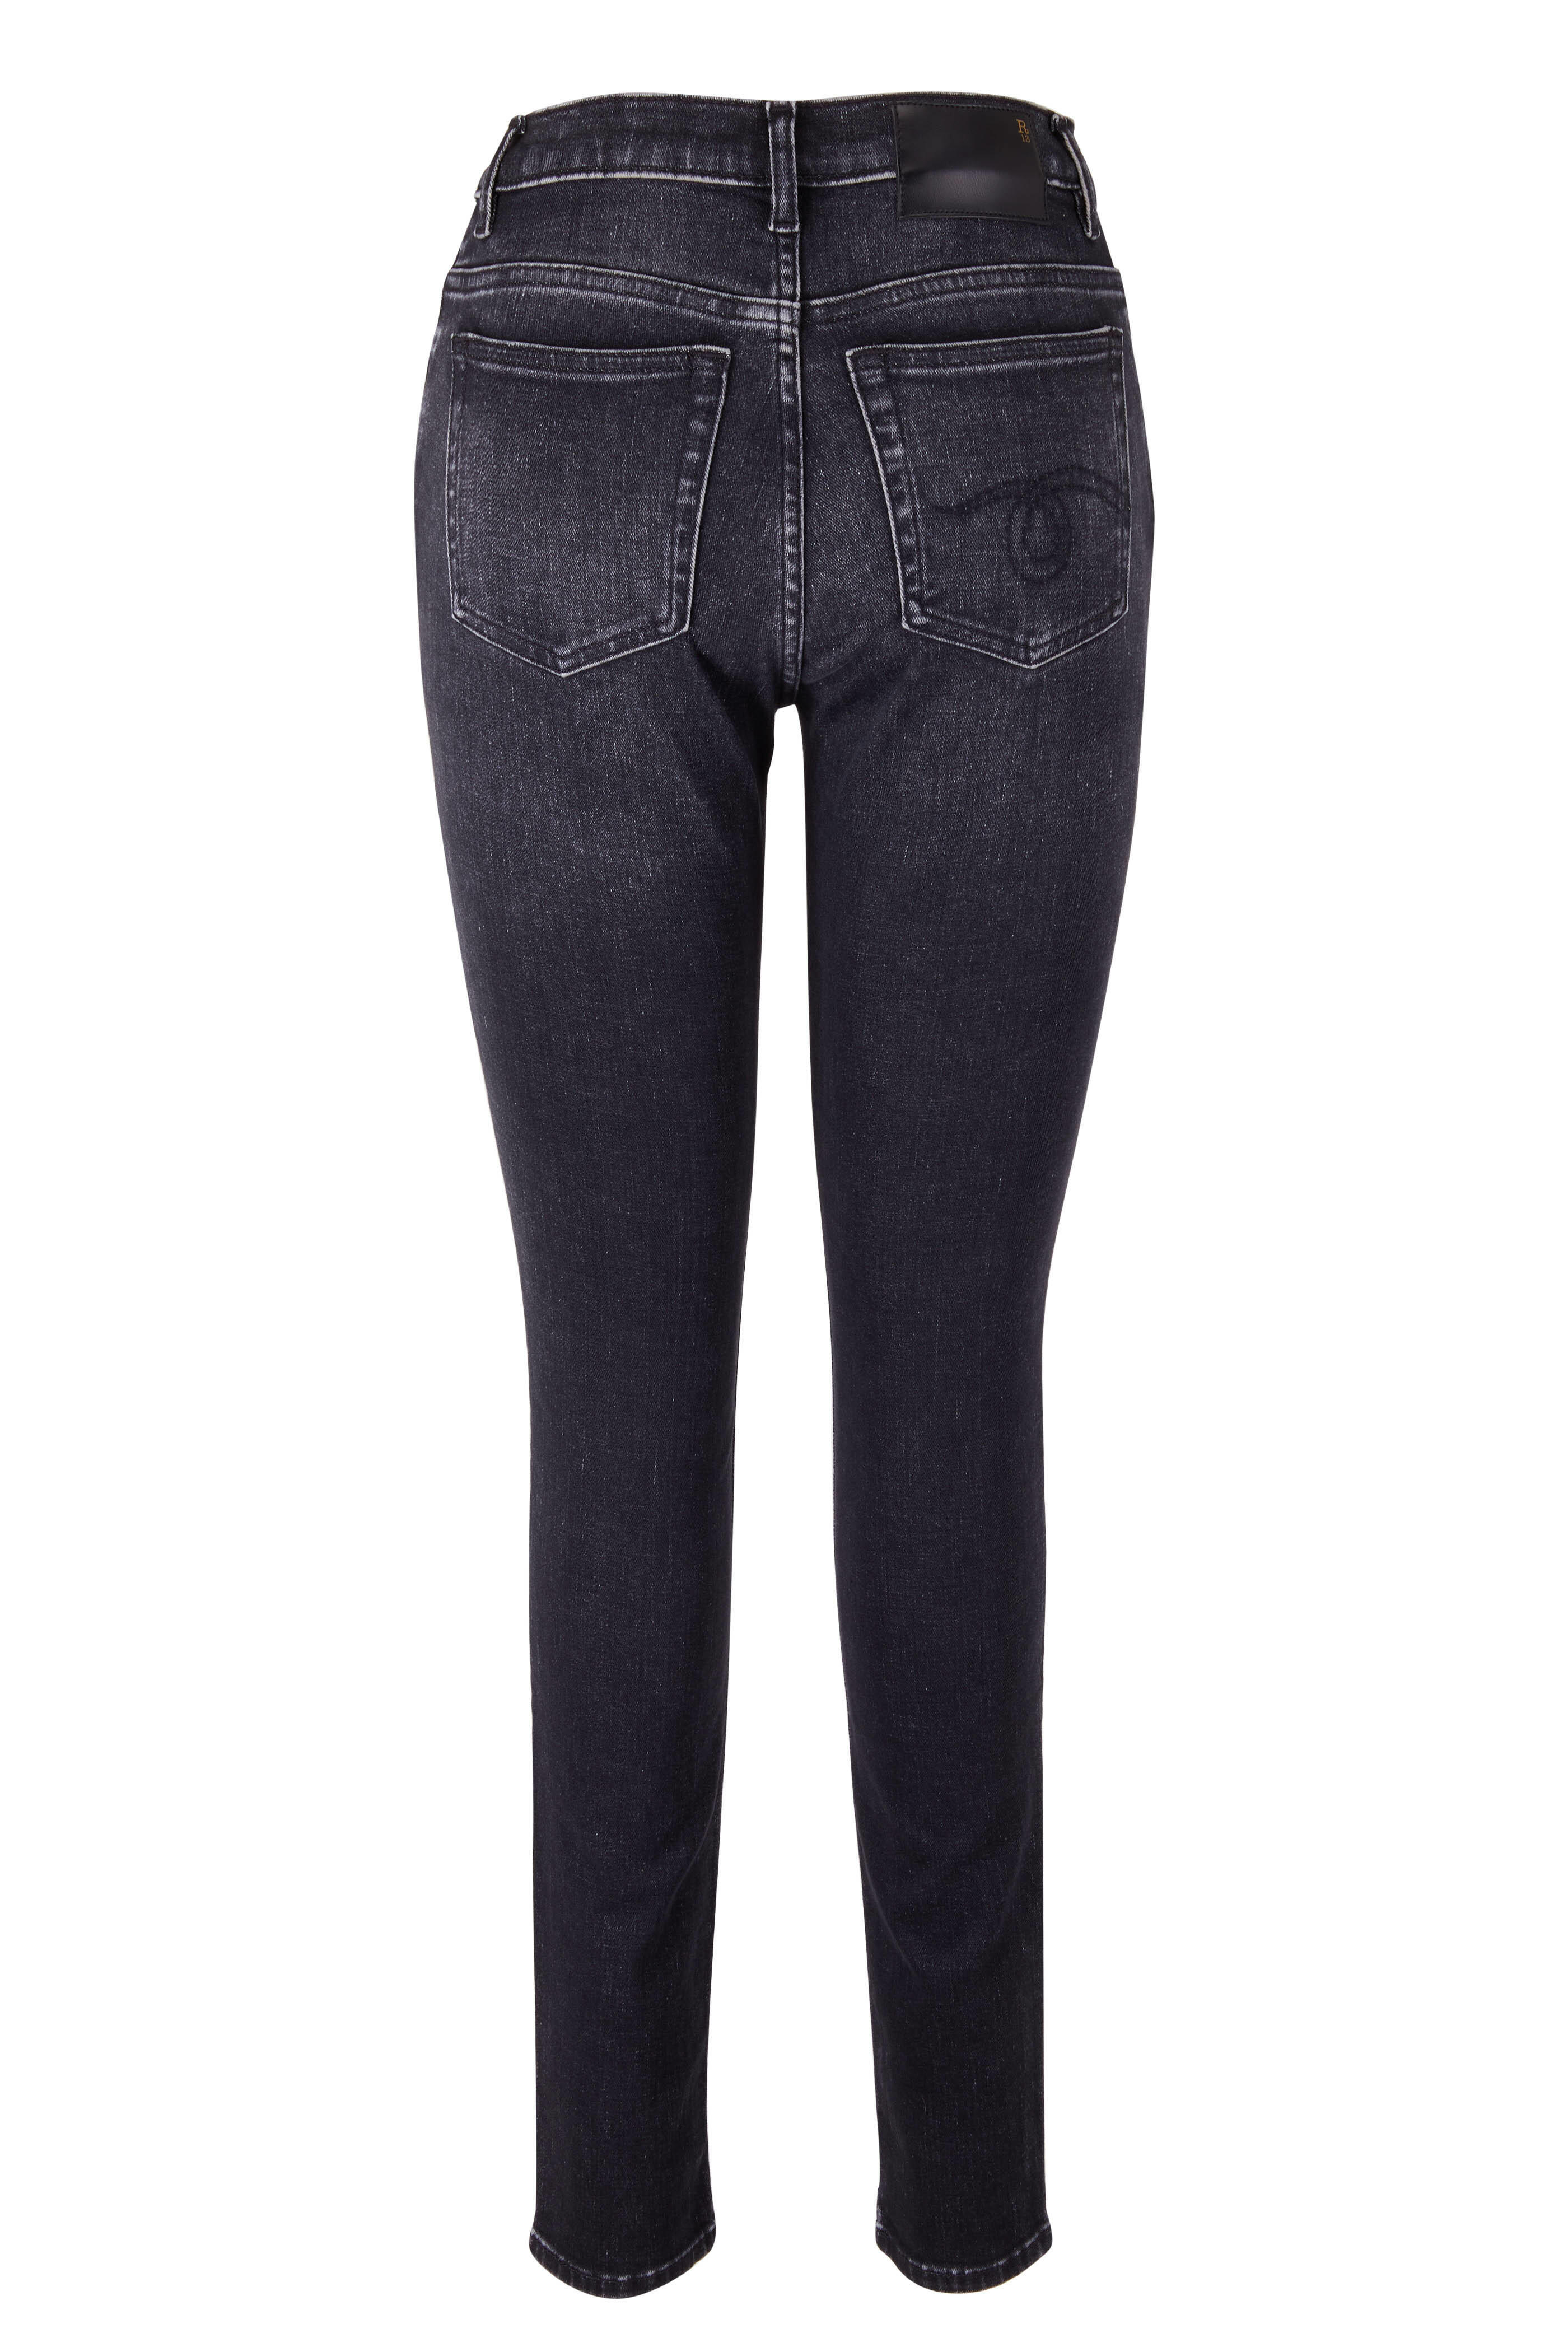 R13 - High-Rise Morrison Black Skinny Jean | Mitchell Stores